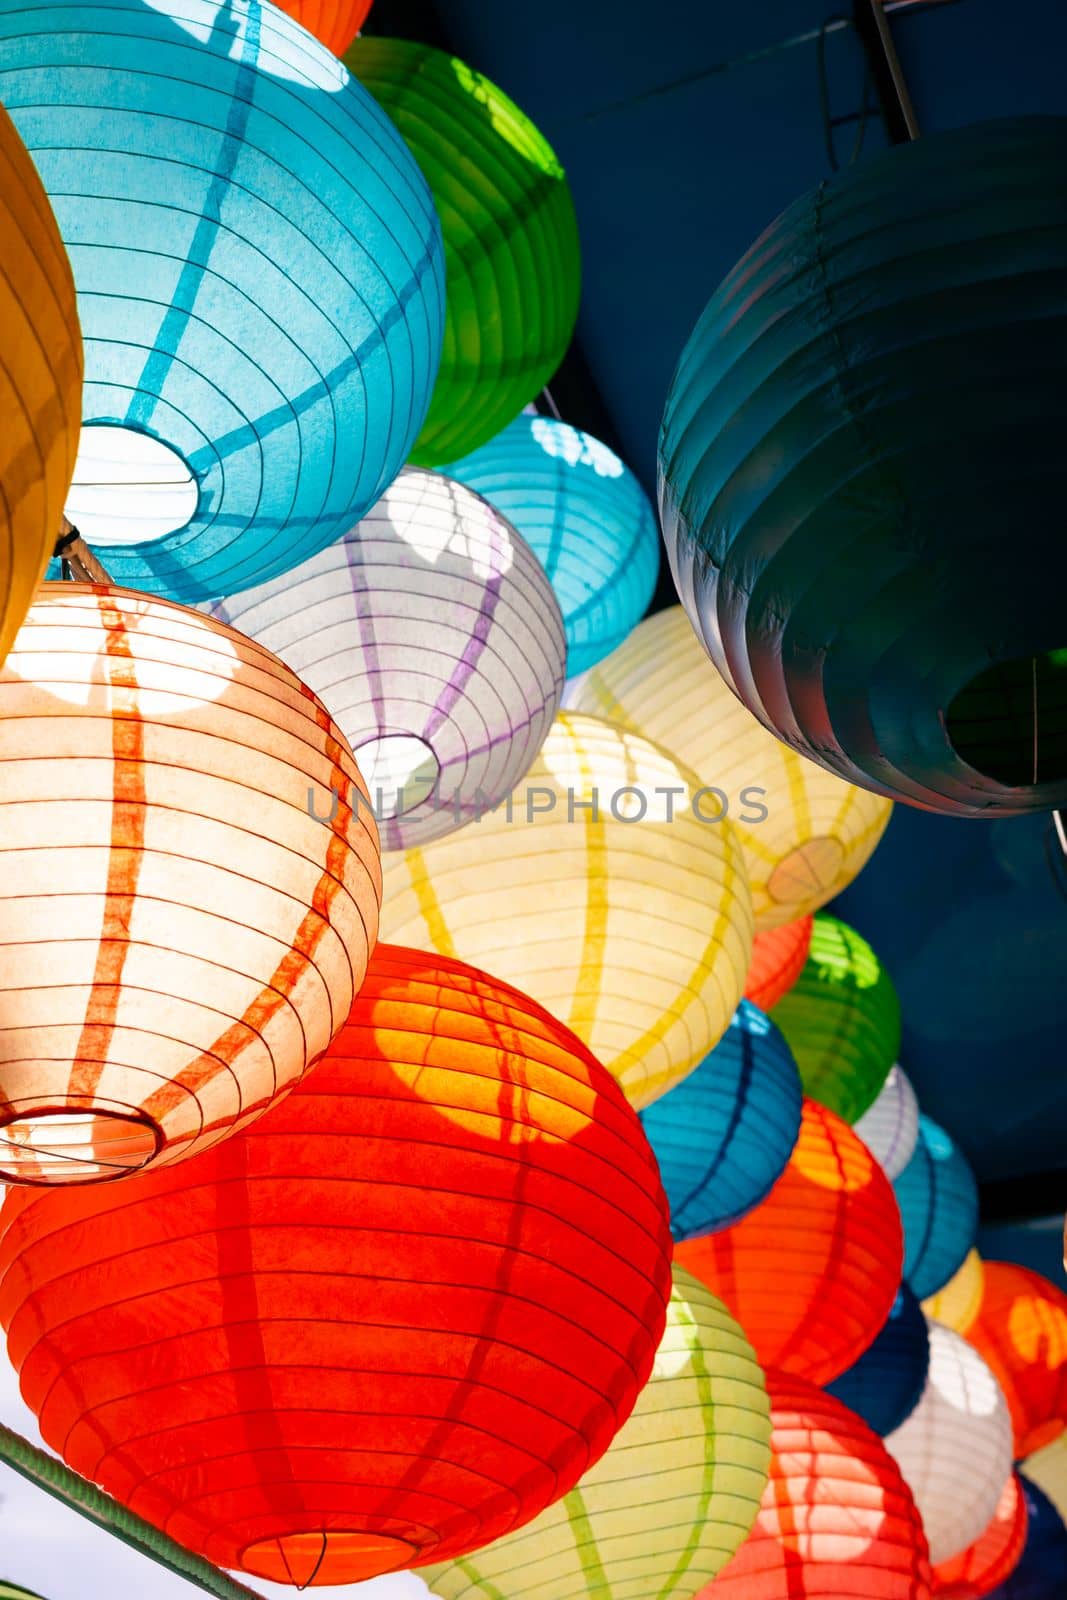 Close focus on colorful globe lamps made from mulberry paper touching sunlight decorated under roof.